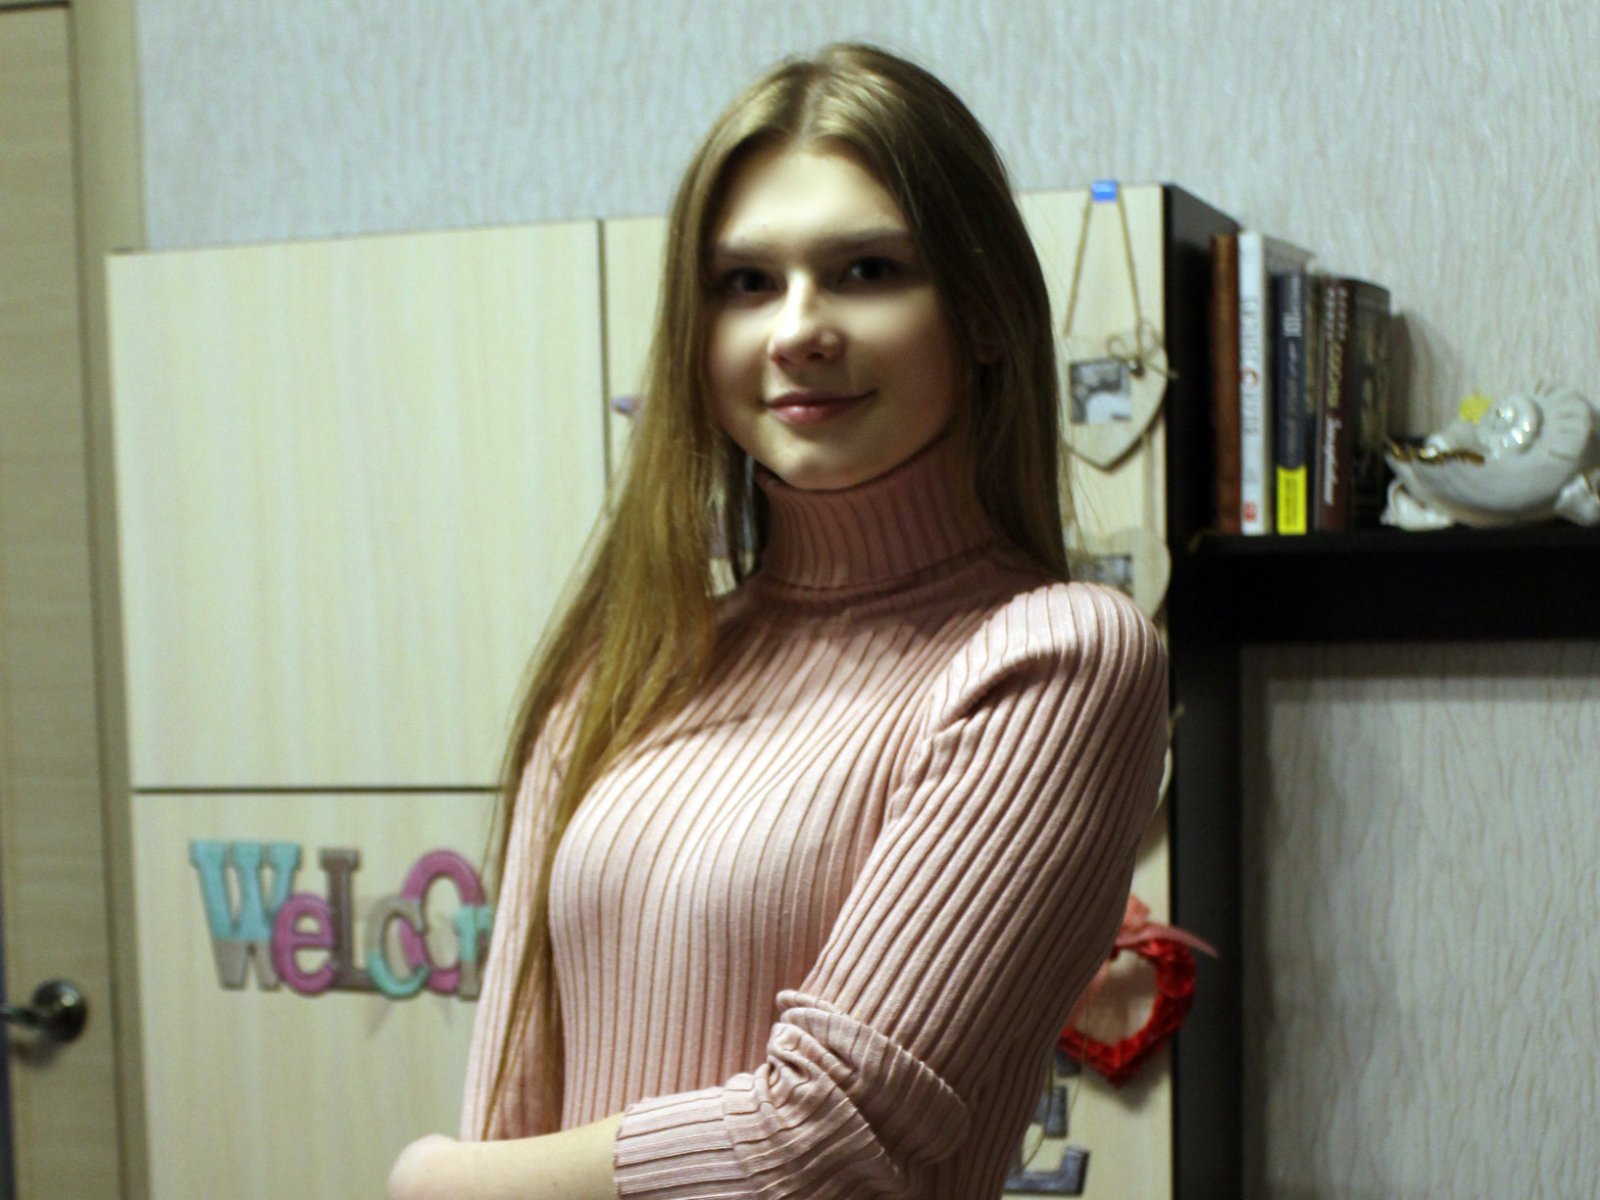 GhostGlory - Chat live exciting with this 18+ teen woman 